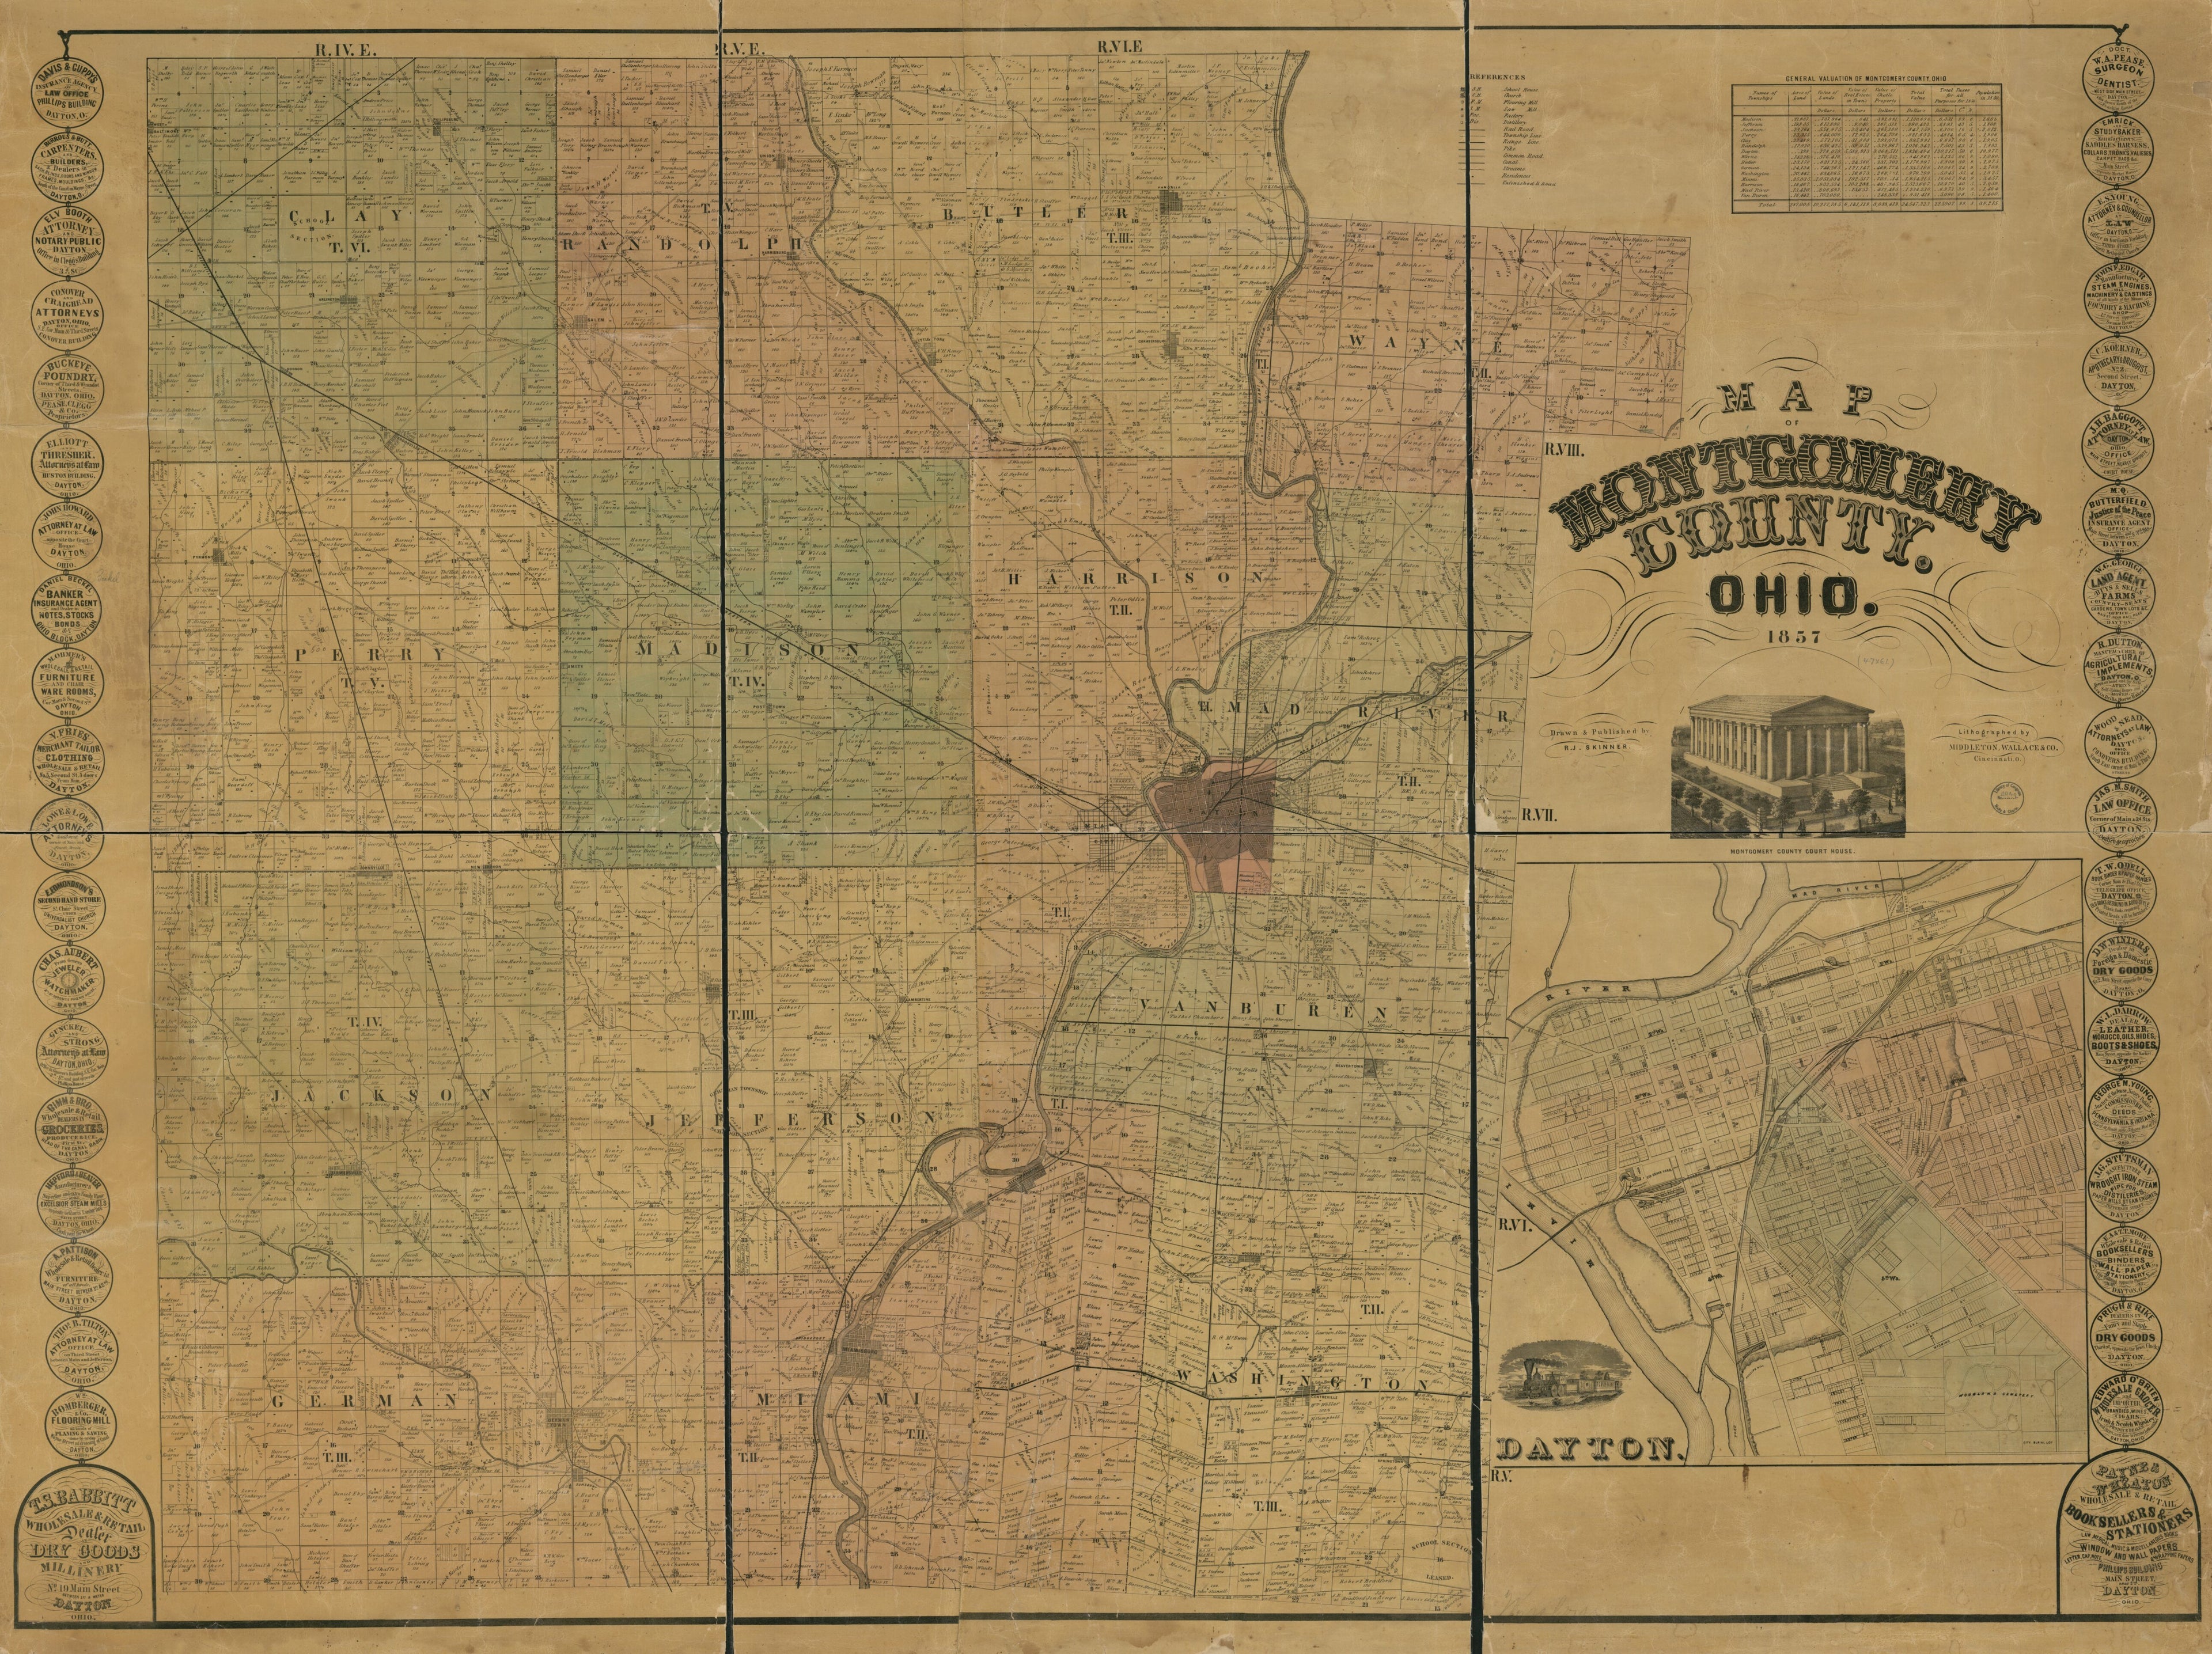 This old map of Map of Montgomery County, Ohio from 1857 was created by Wallace &amp; Co Middleton, Robert J. Skinner in 1857